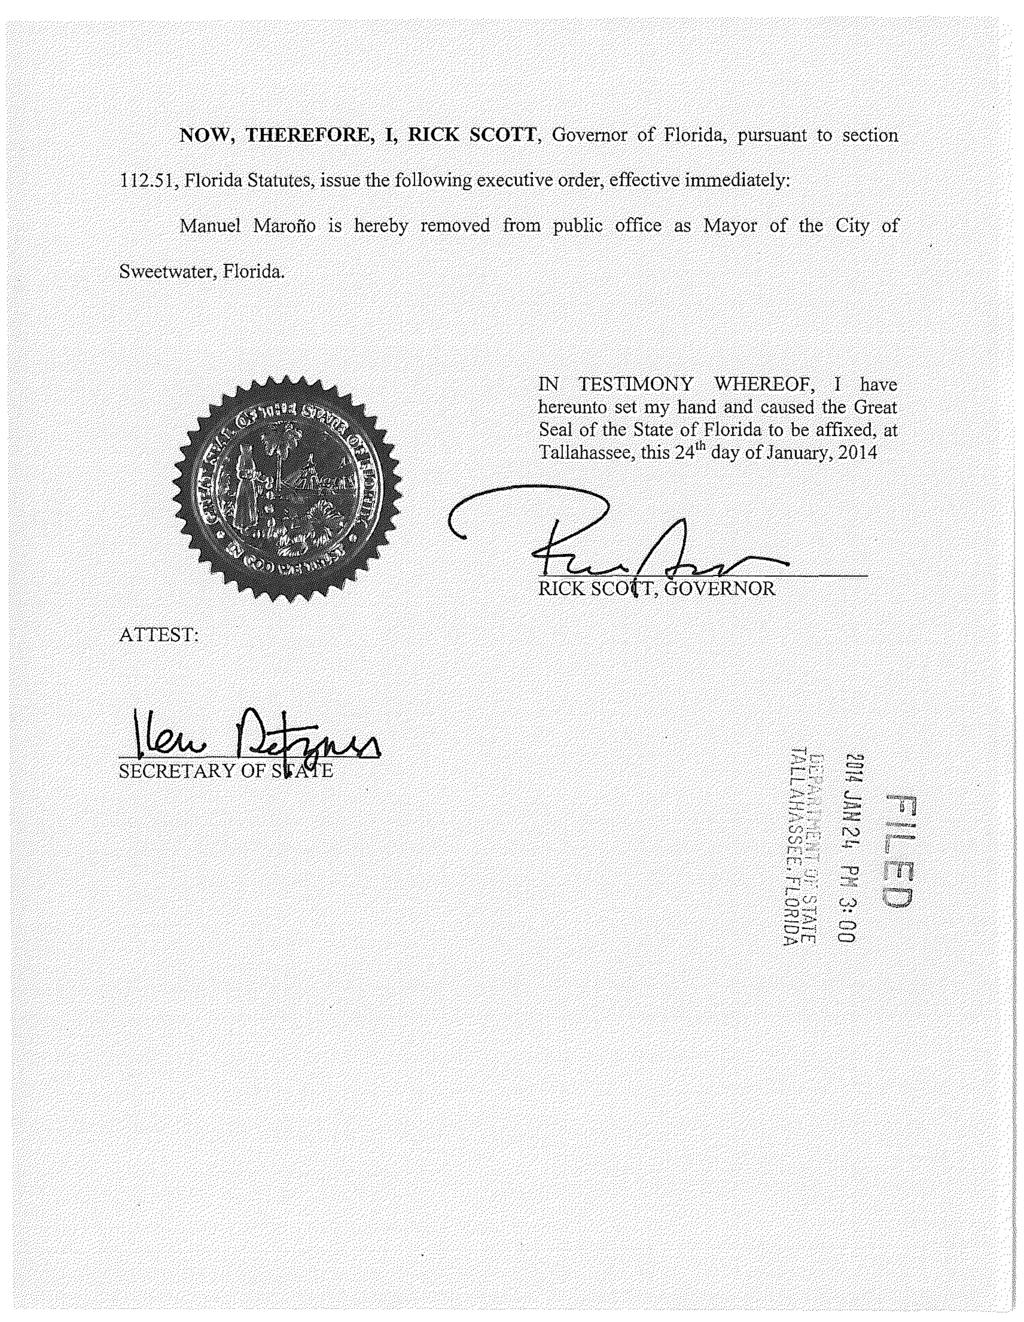 NOW, THEREFORE, I, RICK SCOTT, Governor of Florida, pursuant to section 112.